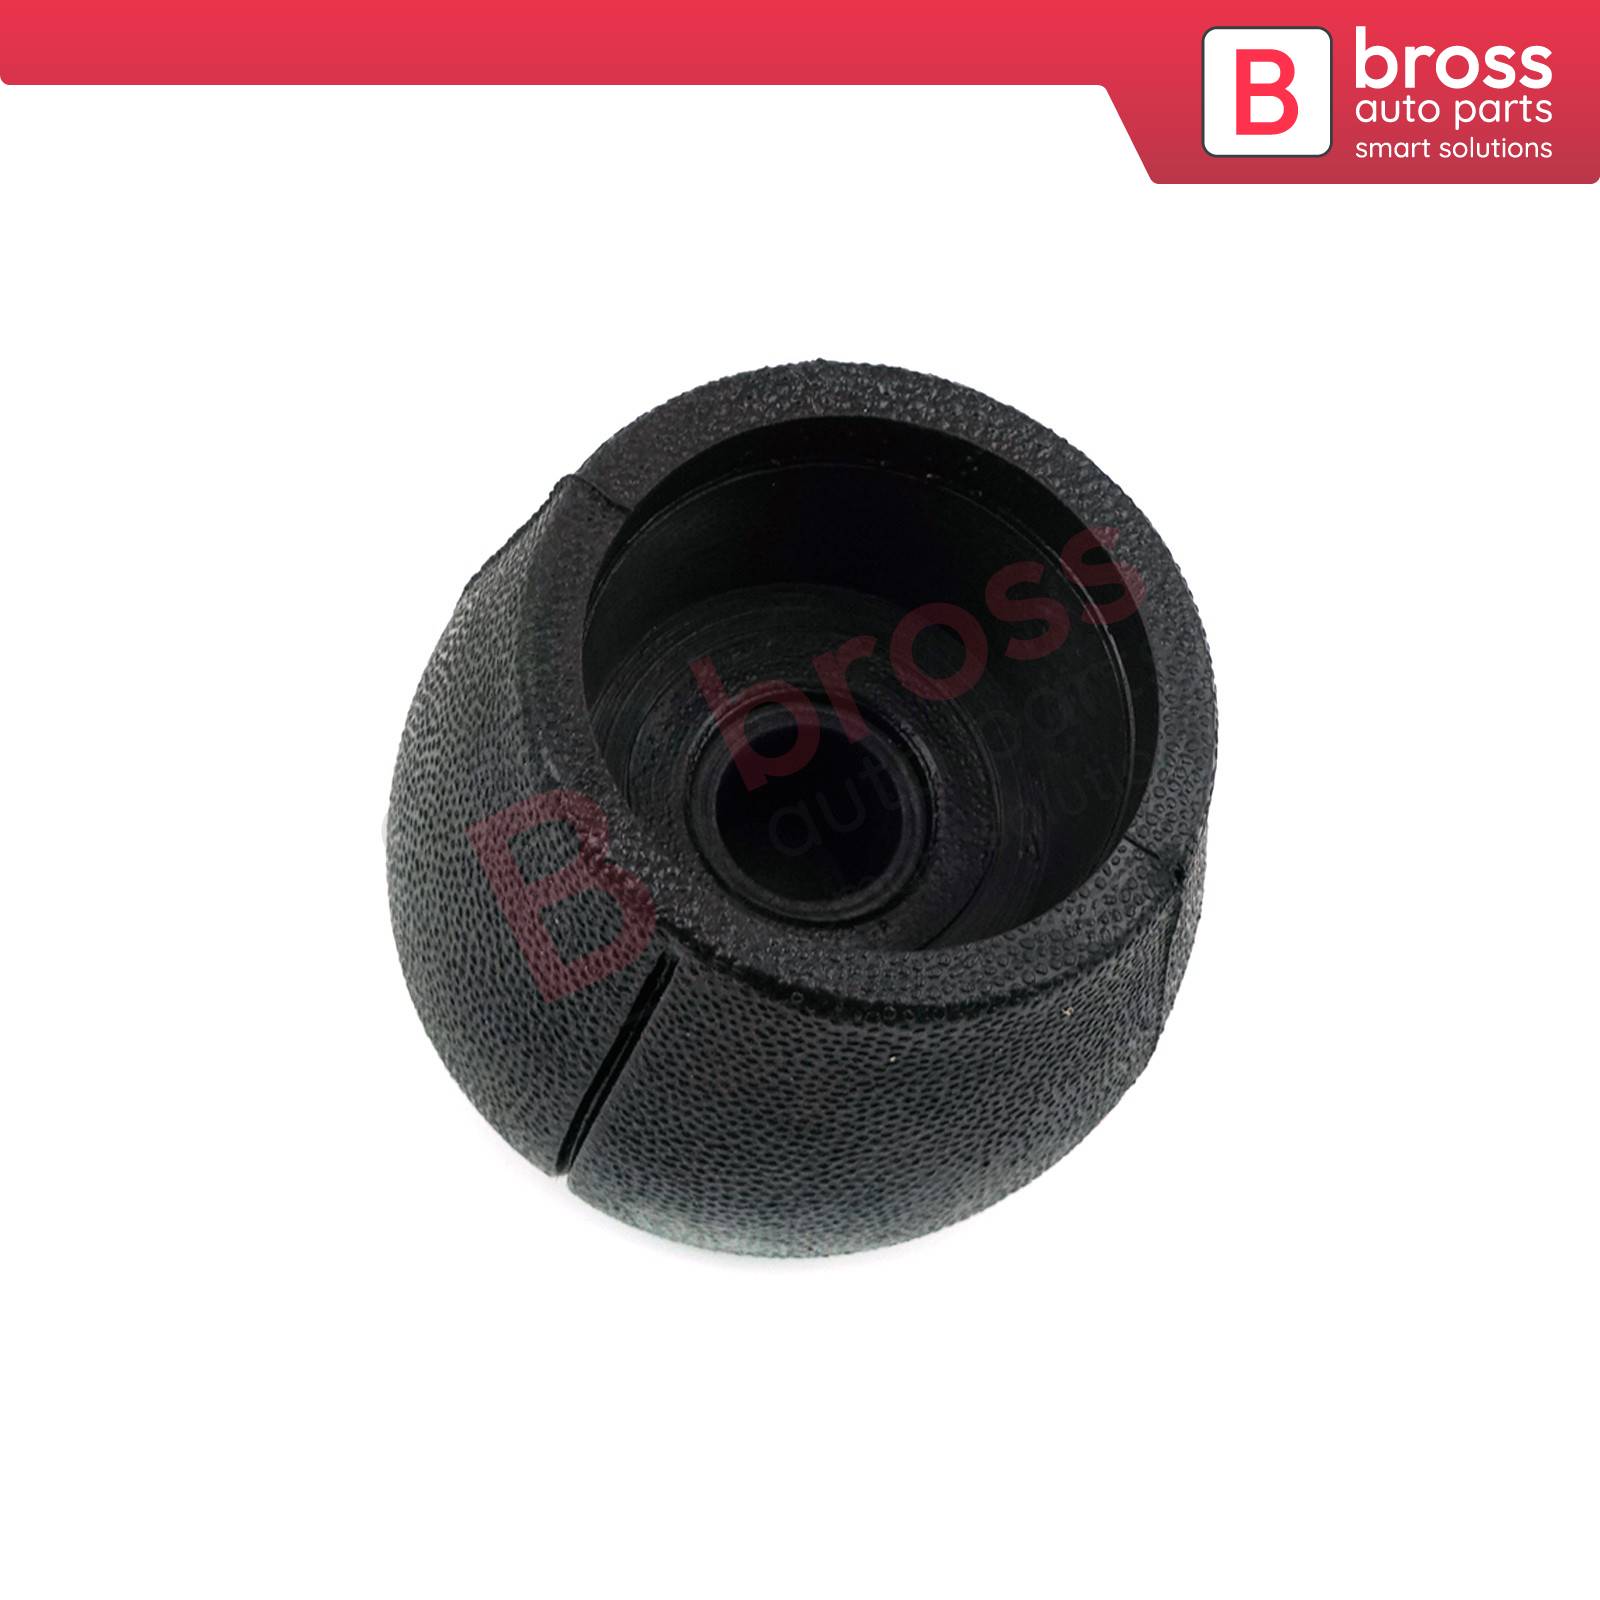 6 Speed Gear Stick Knob with Gaiter Suitable for Vauxhall Vectra C